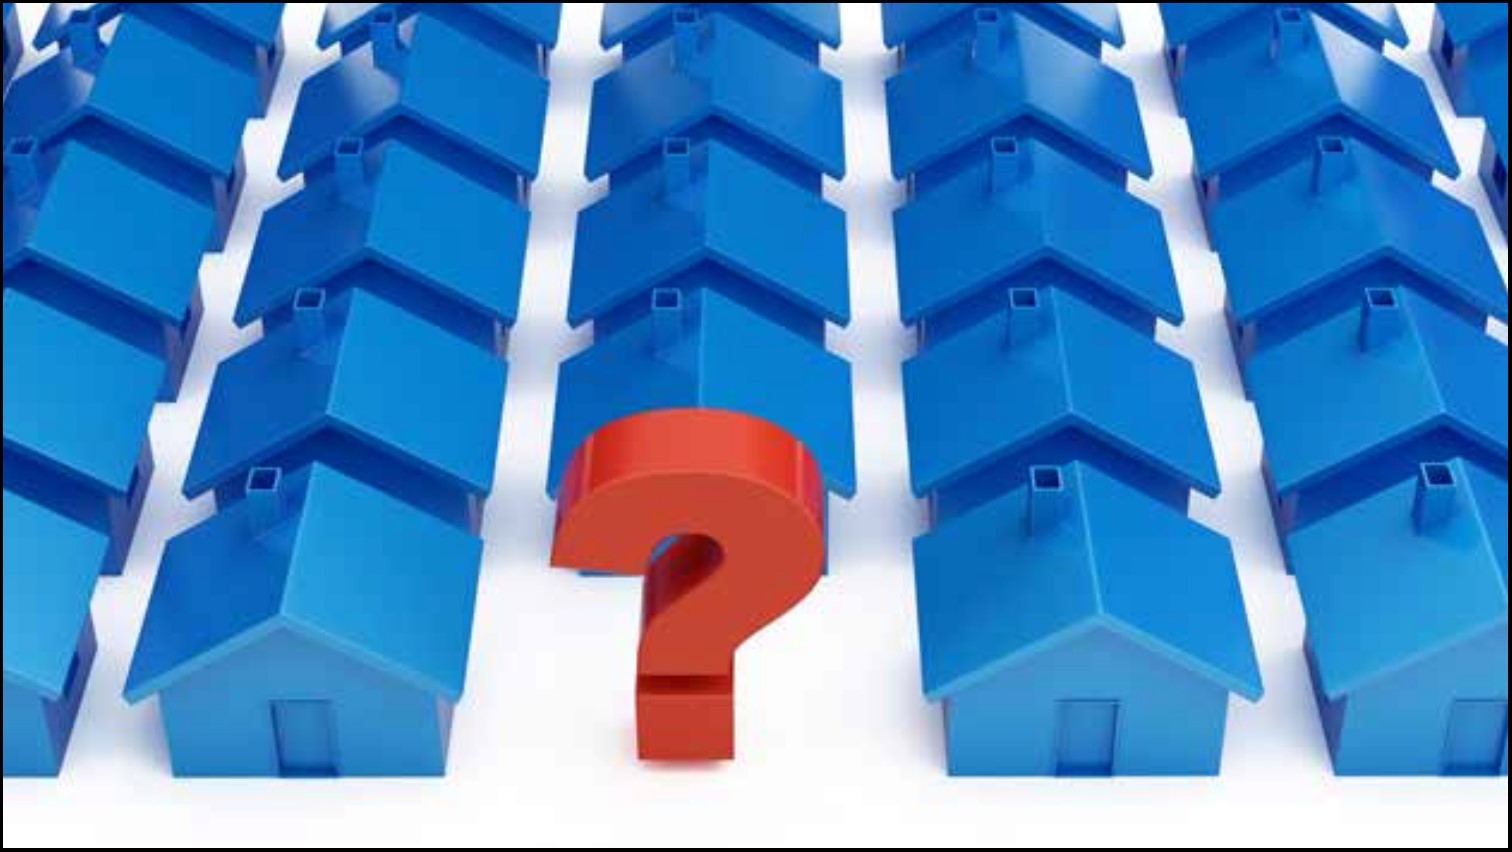 5 Questions to answer before buying or selling